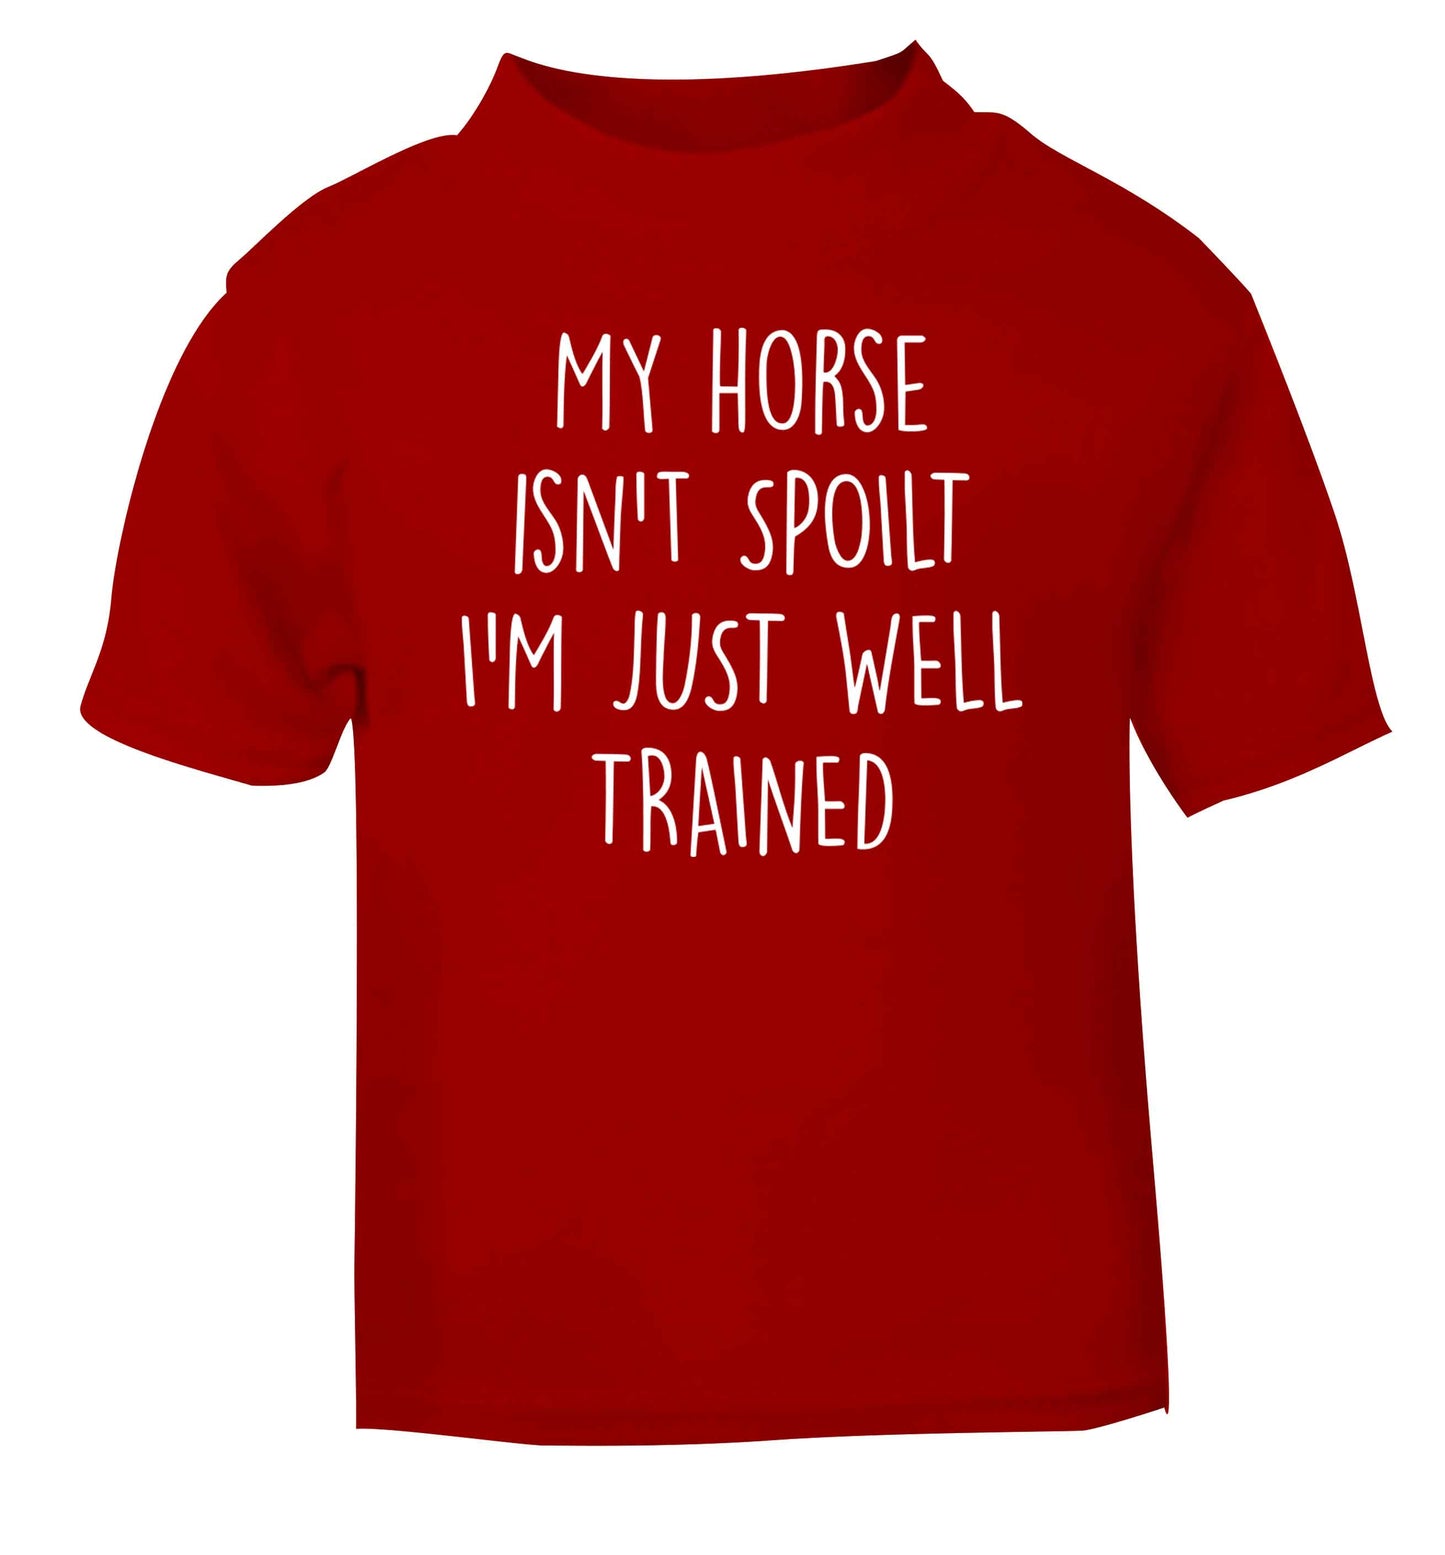 My horse isn't spoilt I'm just well trained red baby toddler Tshirt 2 Years